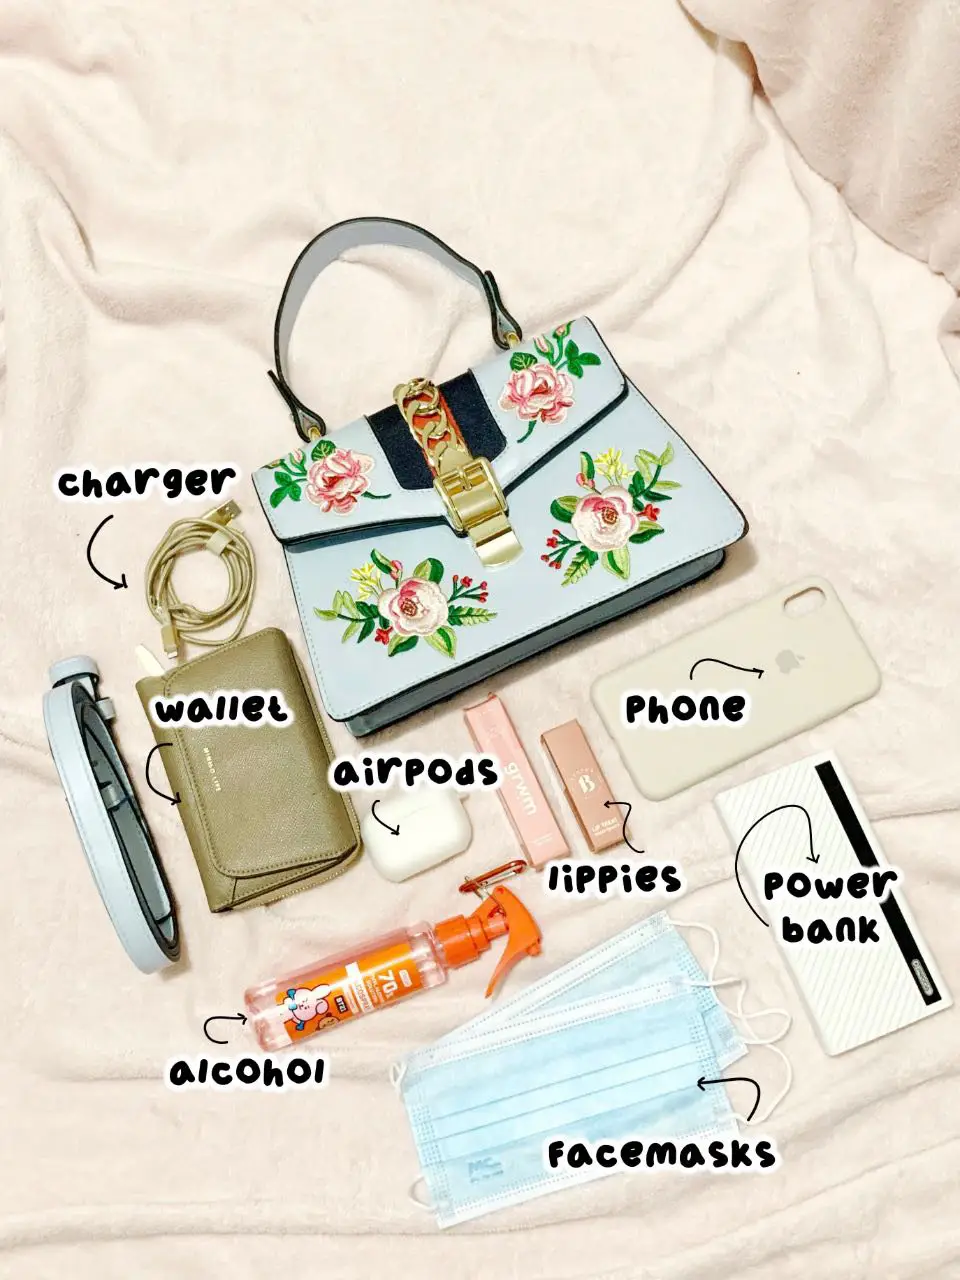 Help me decide on an everyday errands bag! Other suggestions